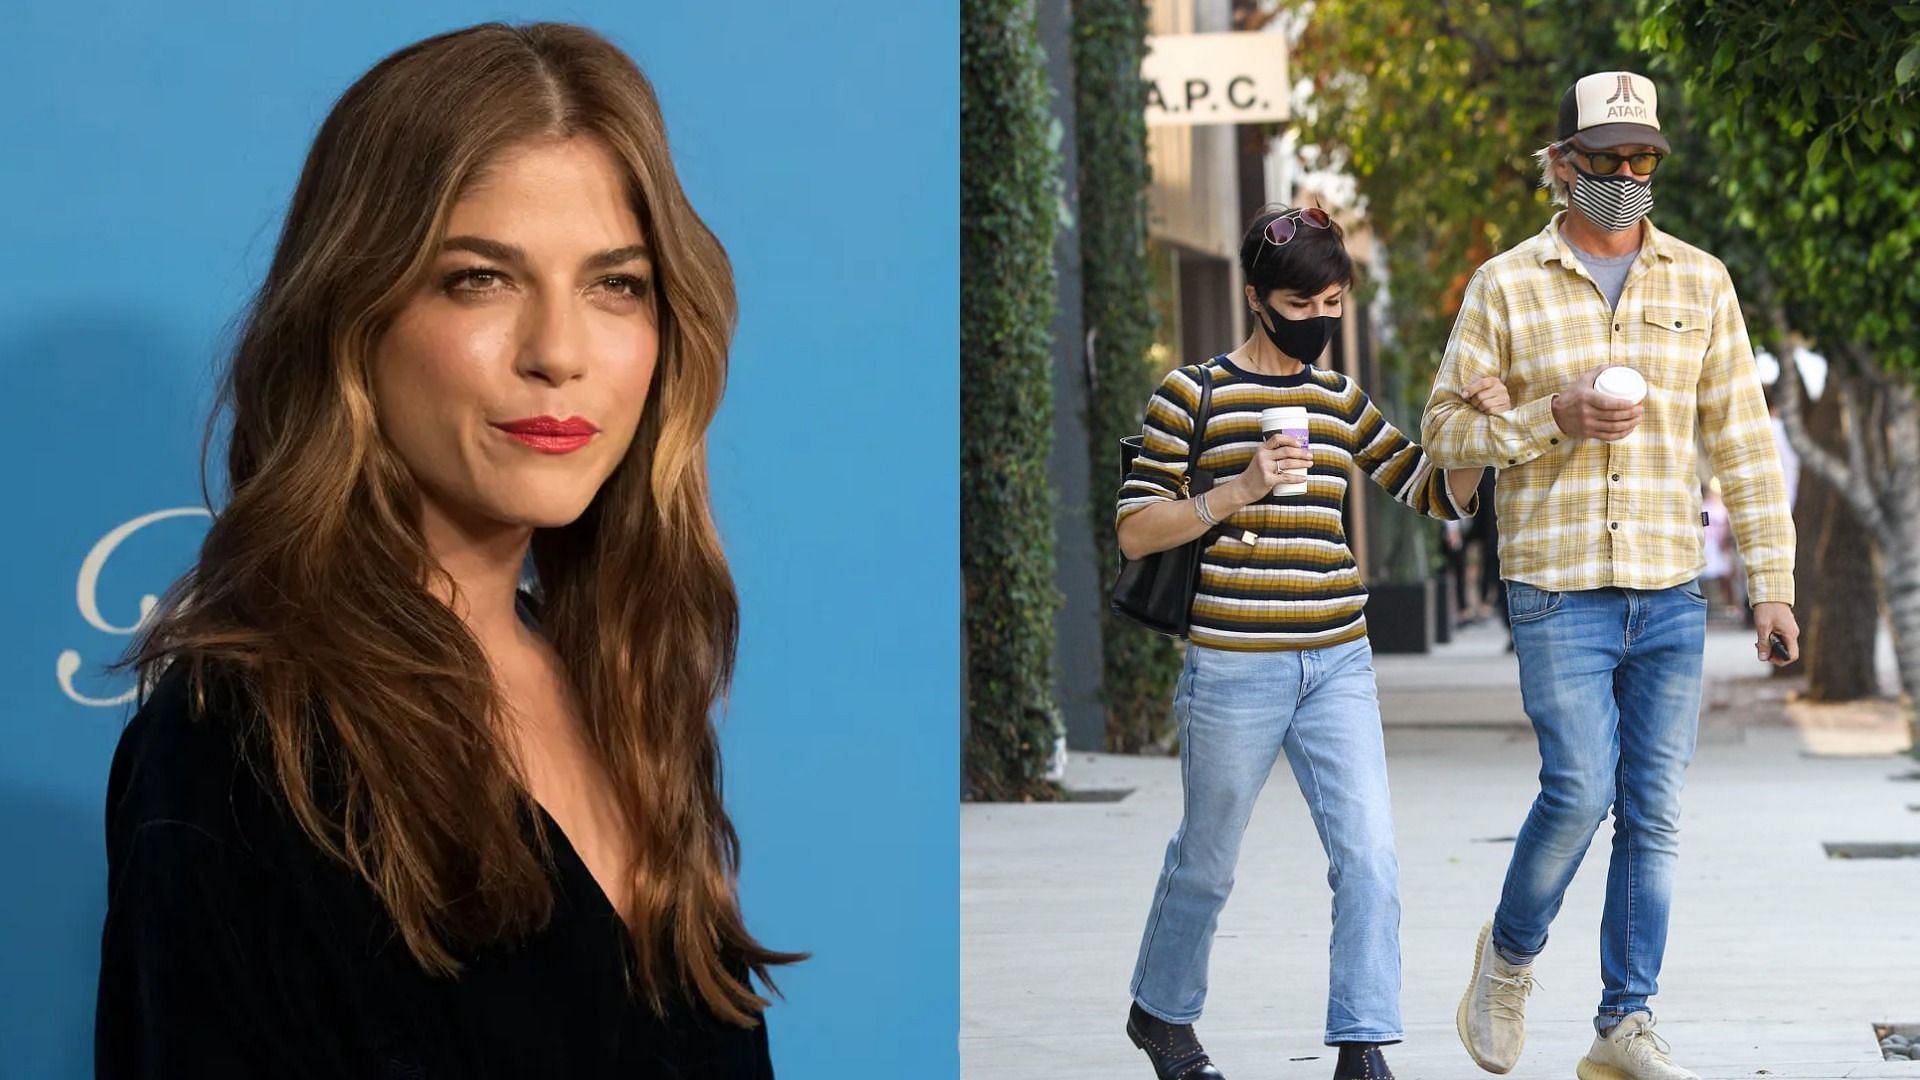 Selma Blair and Ron Carlson started dating in July 2017 (Image via Getty Images/ Earl Gibson III/ BG020/Bauer-Griffin)